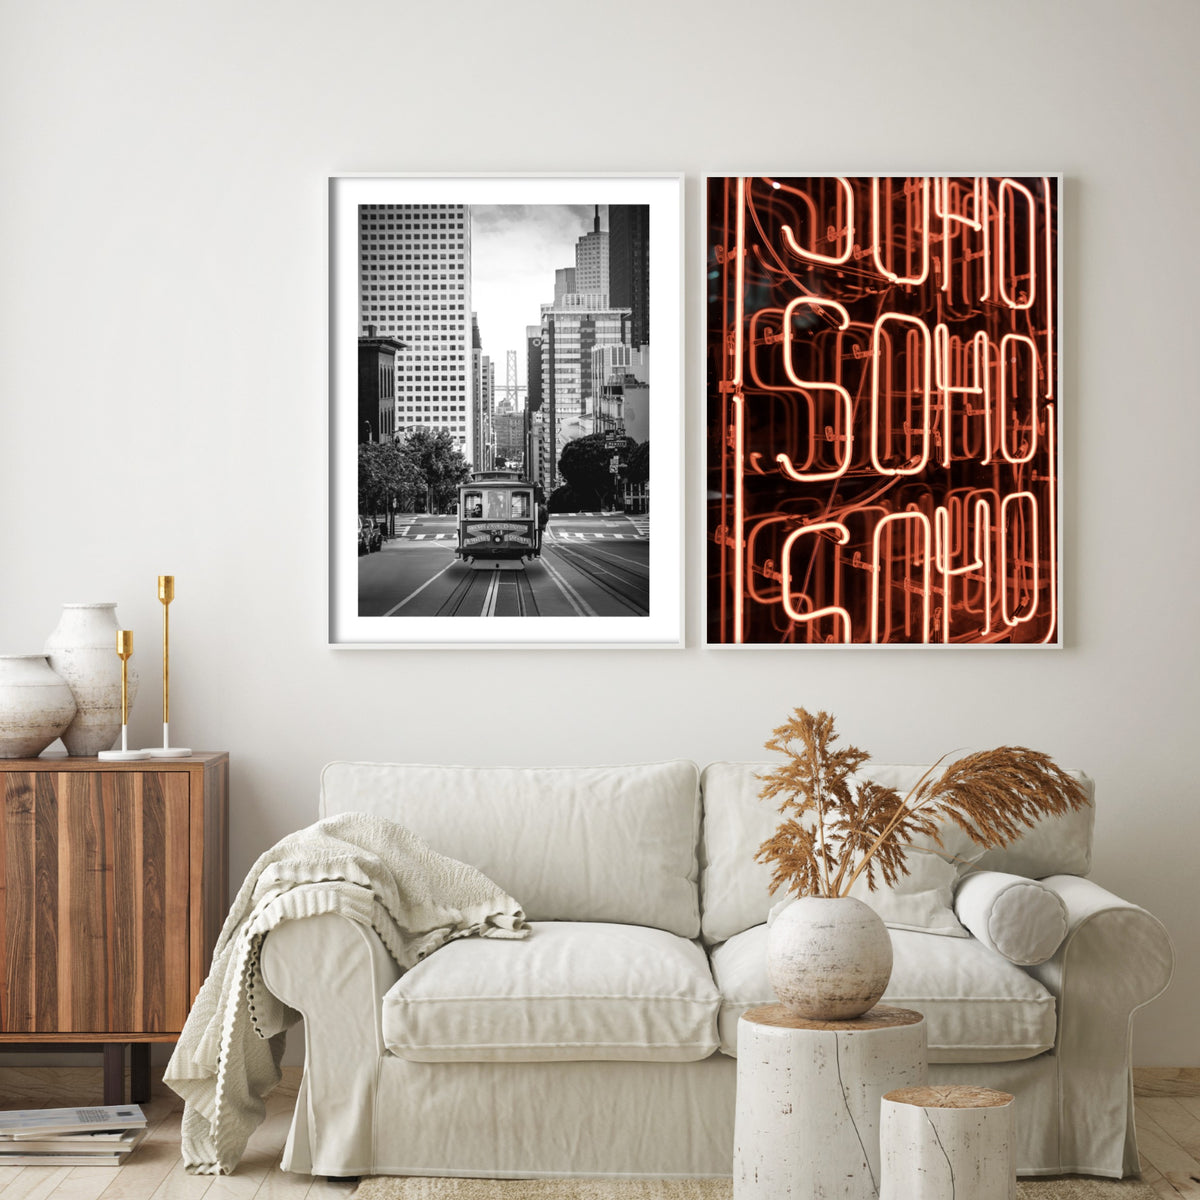 | And Slay – San Print My Photography Black Francisco Poster Retro White Cable Car